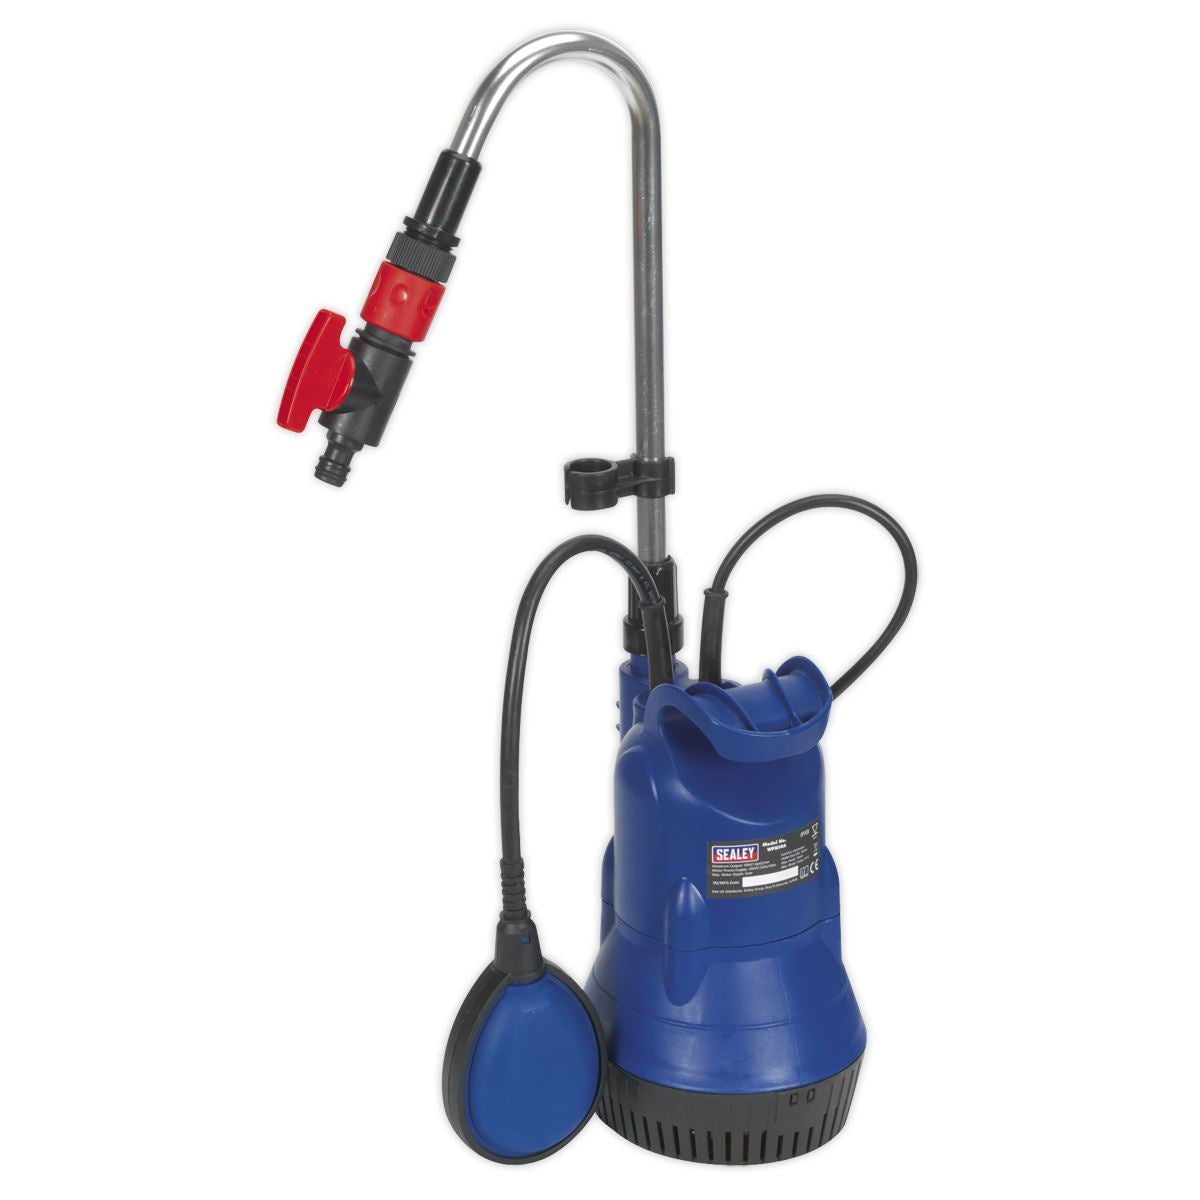 Sealey Submersible Water Butt Pump 50L/min 230V